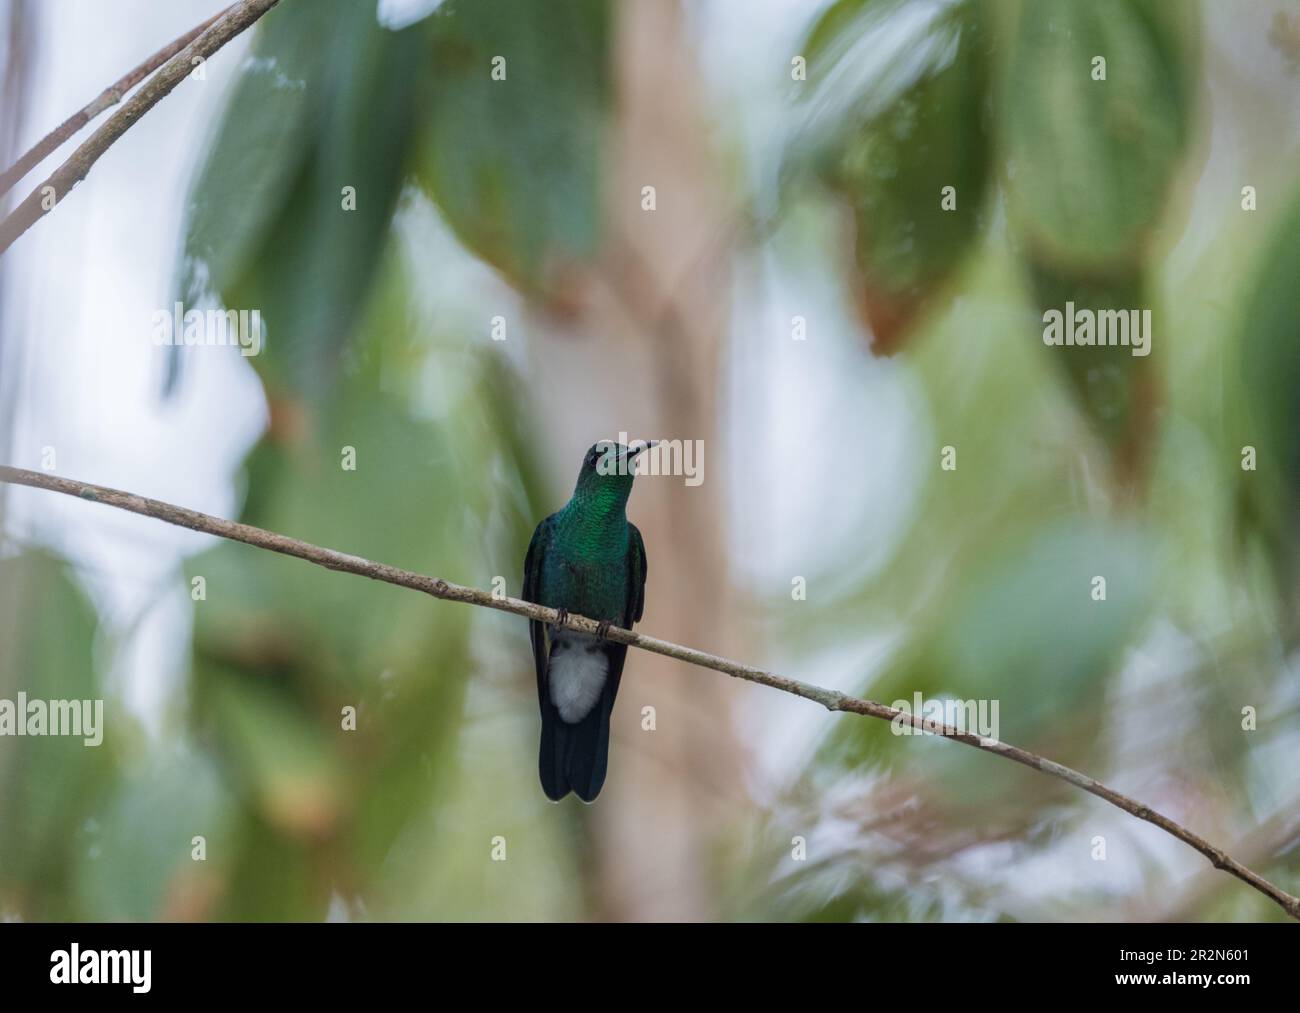 A perched Bronze-tailed Plumeleteer (Chalybura urochrysia), a hummingbird, In Panama Stock Photo